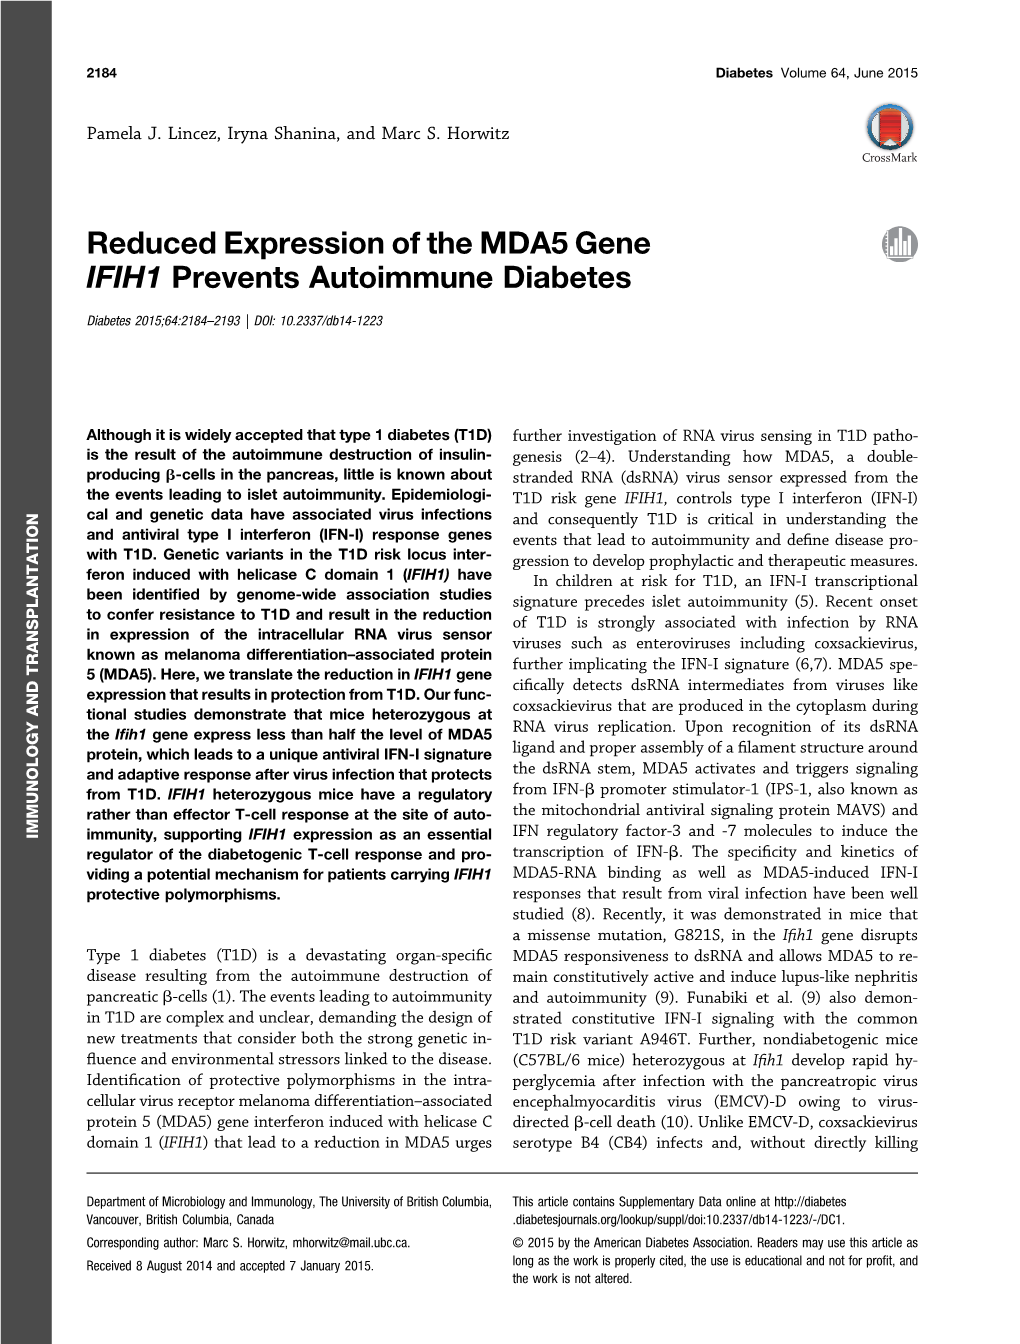 Reduced Expression of the MDA5 Gene IFIH1 Prevents Autoimmune Diabetes